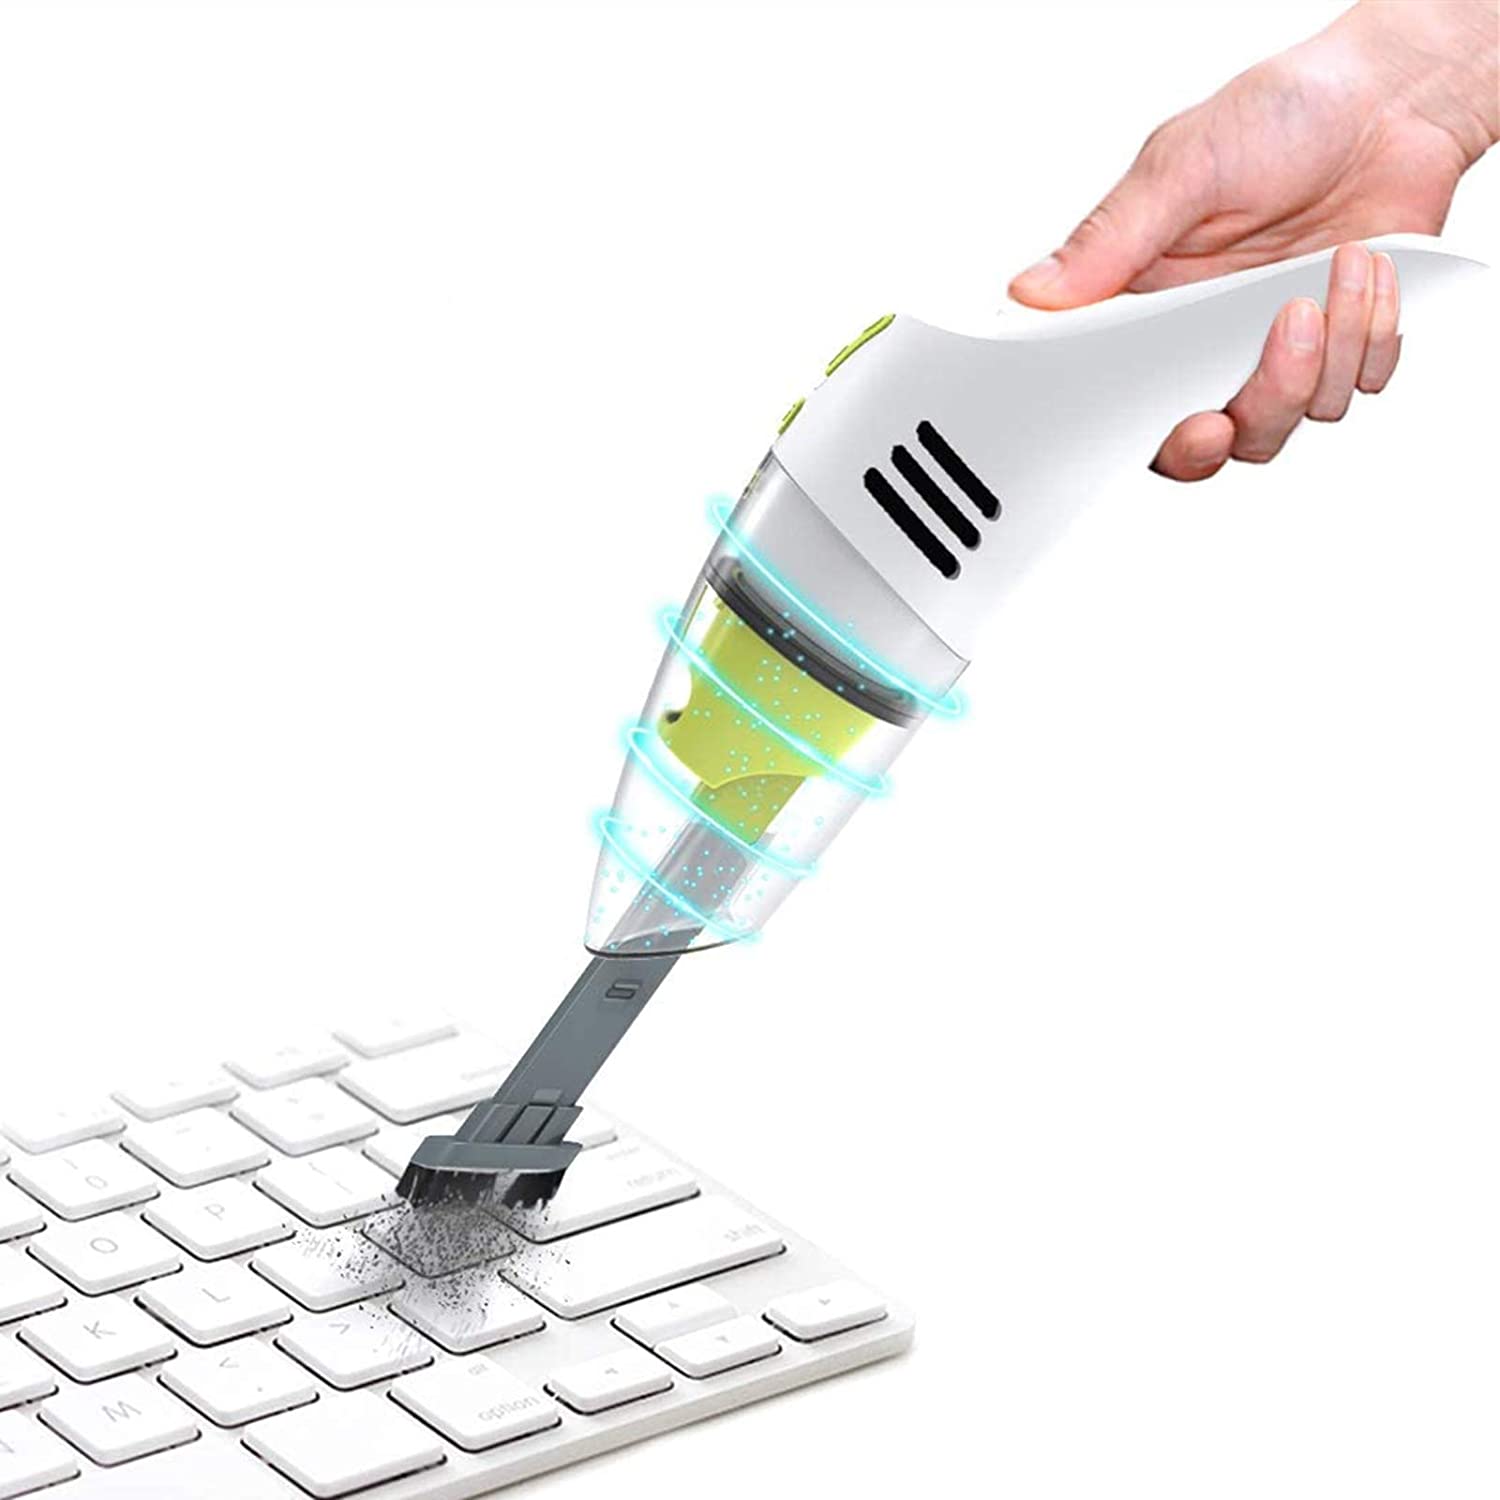 MECO Dry & Wet Compatible PC Keyboard Vacuum